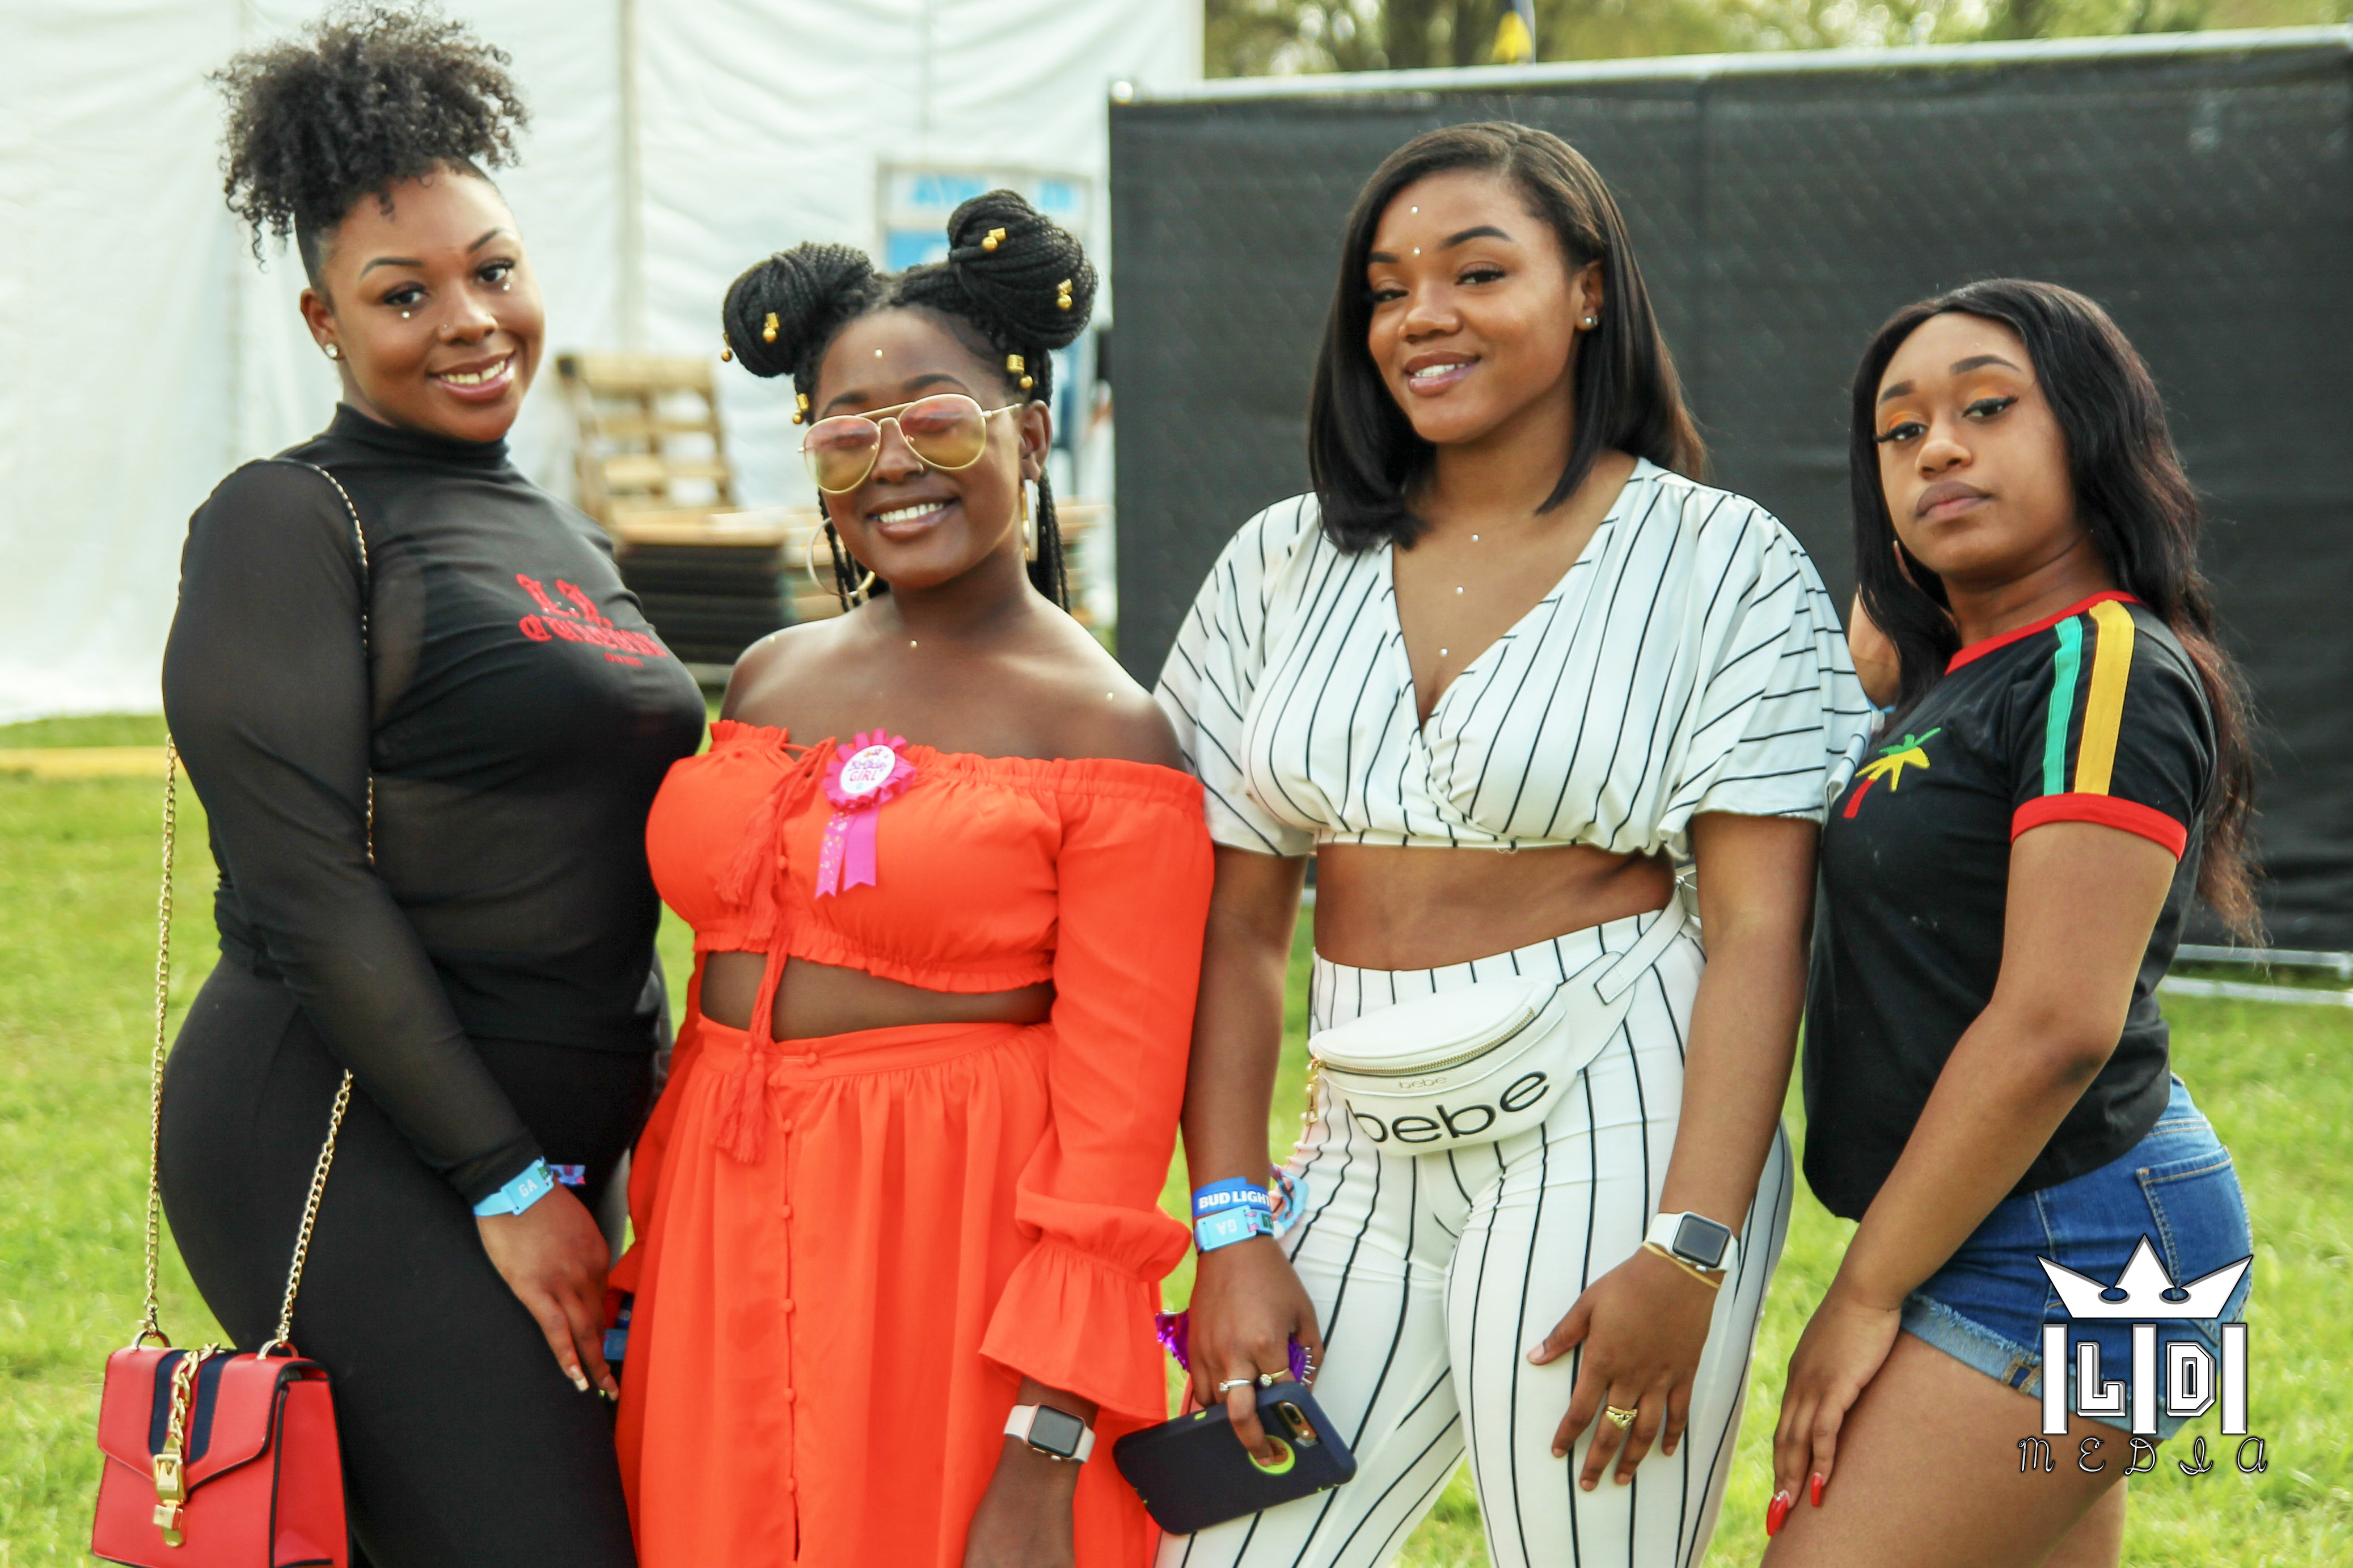 Gallery] Dreamville Festival Brought An Eclectic Mix Of Fashions -  Spectacular Magazine